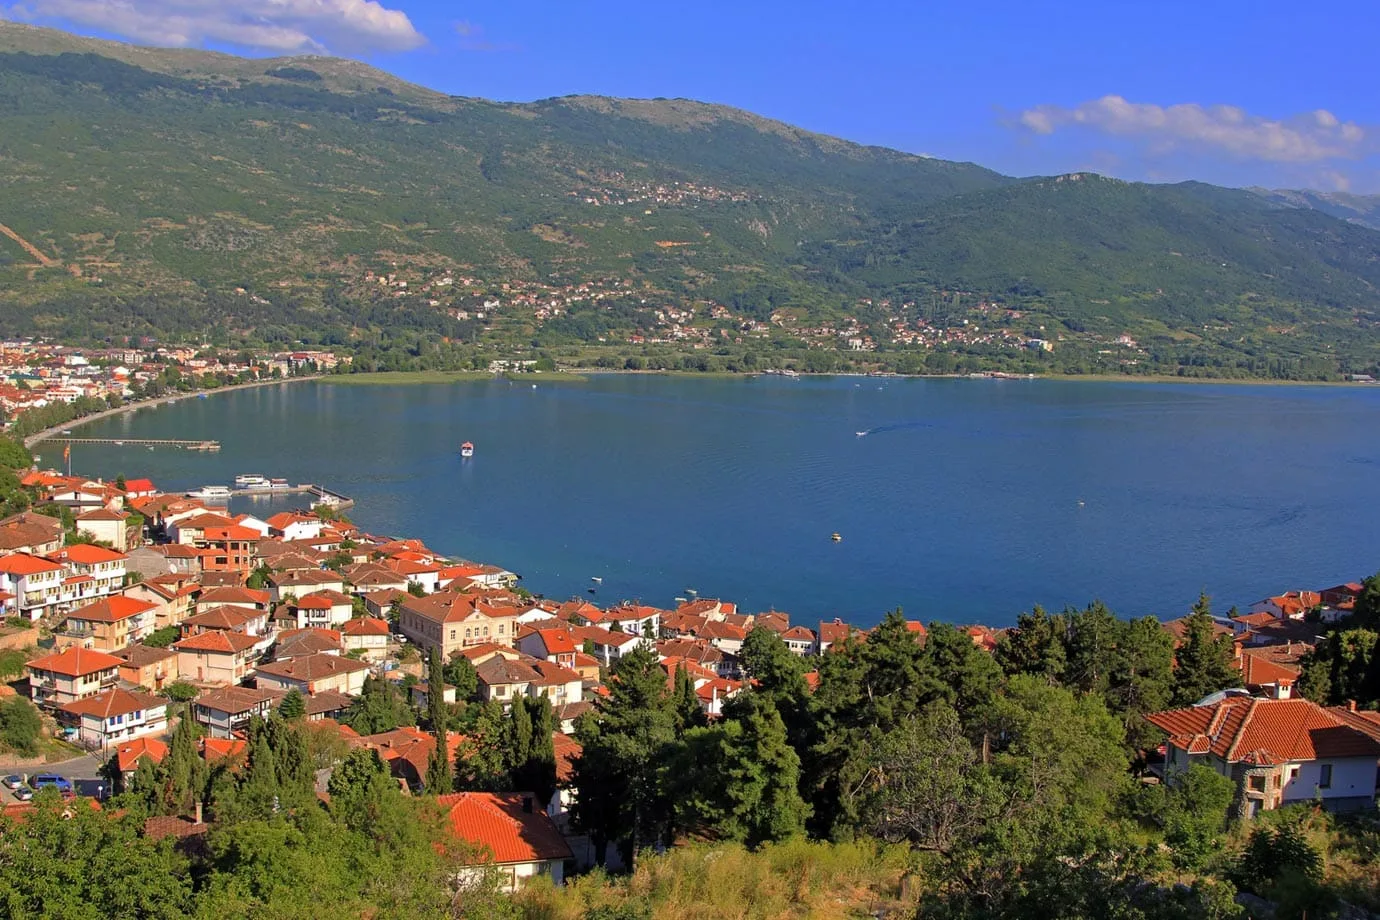 Ohrid really is one of the places to see in Macedonia